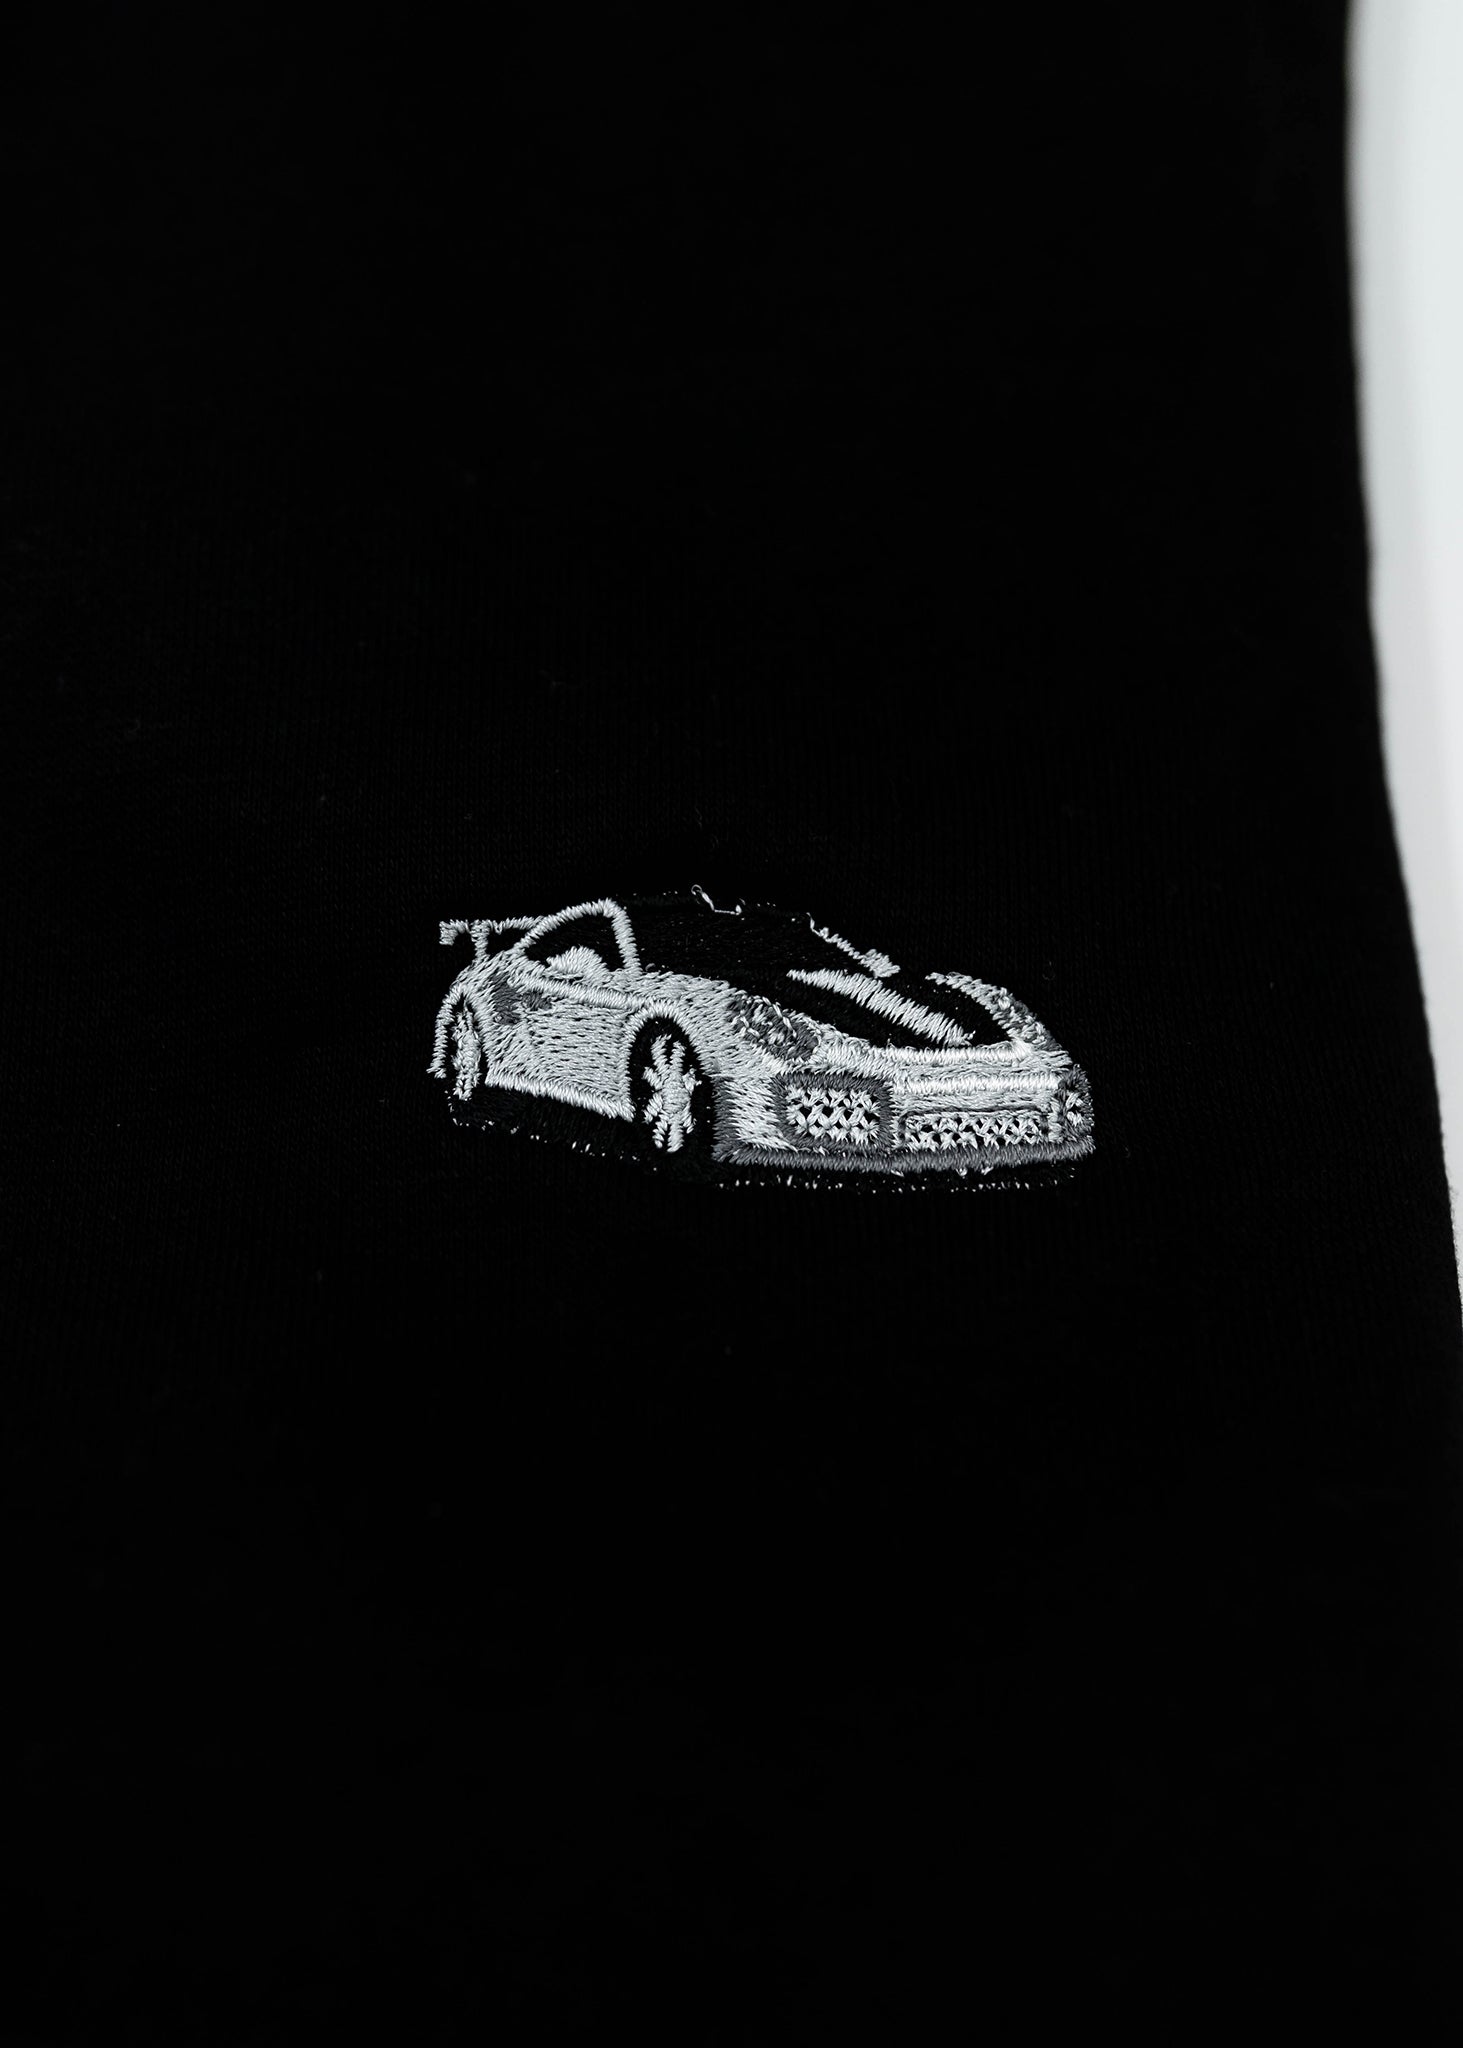 Close up of an embroidered 991.2 GT2 RS on a black men's high quality crewneck sweater. Photo shows the high quality detailed embroidery of a white, silver, and carbon fiber GT2 RS. Fabric composition of the shirt is cotton and polyester. The material is very soft, stretchy, and non-transparent. The style of this sweater is a crewneck, long sleeve, elastic bottom, with embroidery on the left chest.